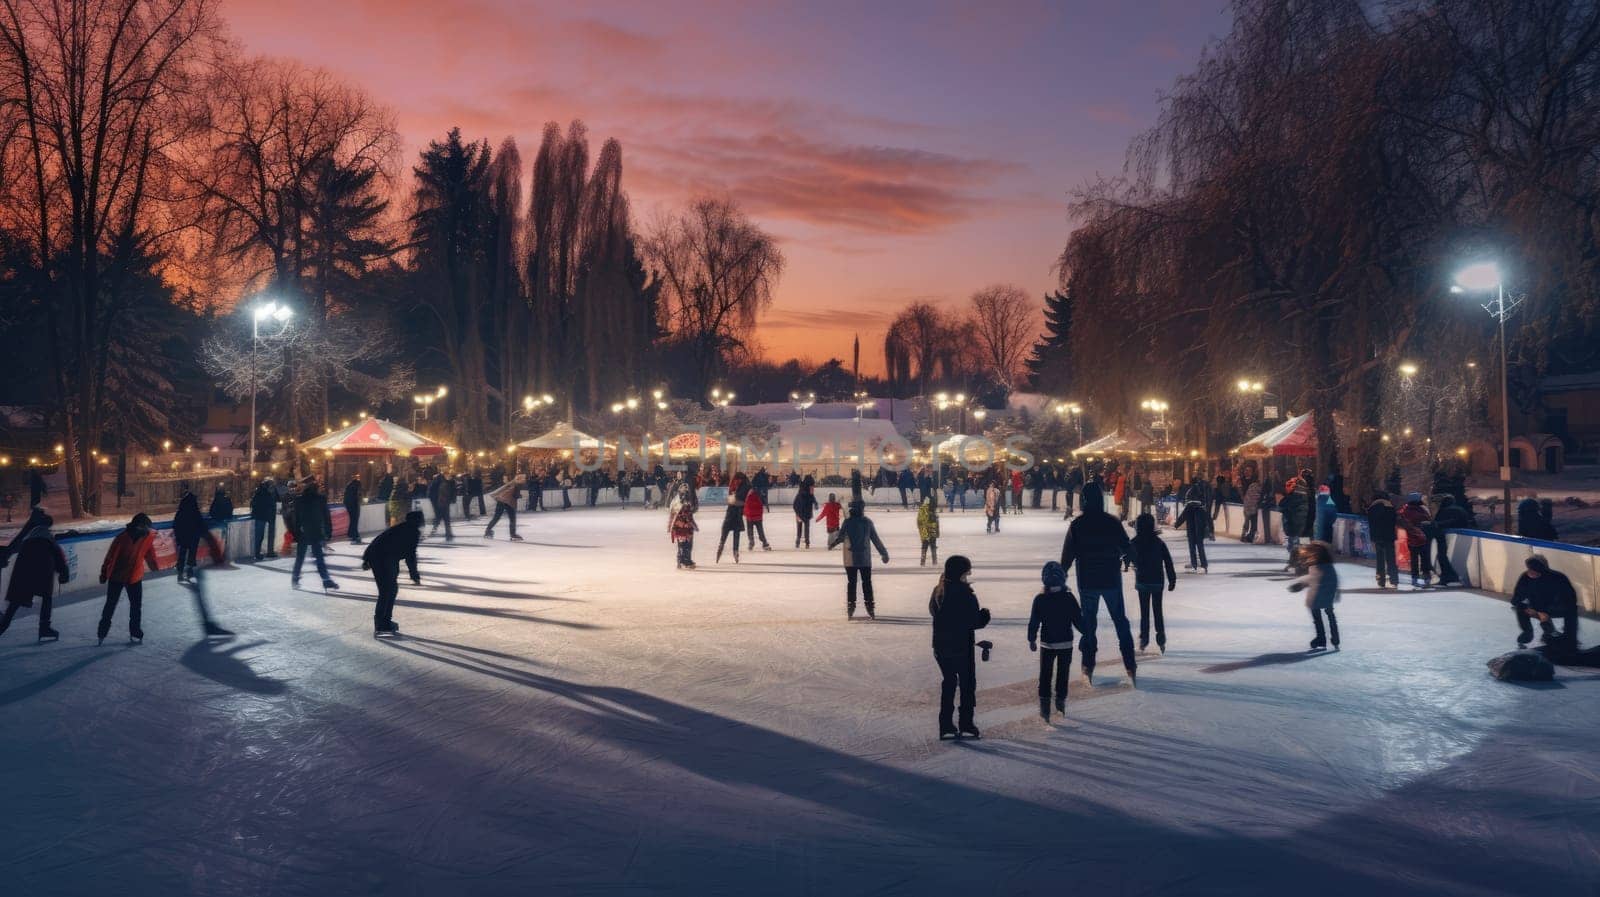 Ice skating rink in winter. Happy moments spent together AI